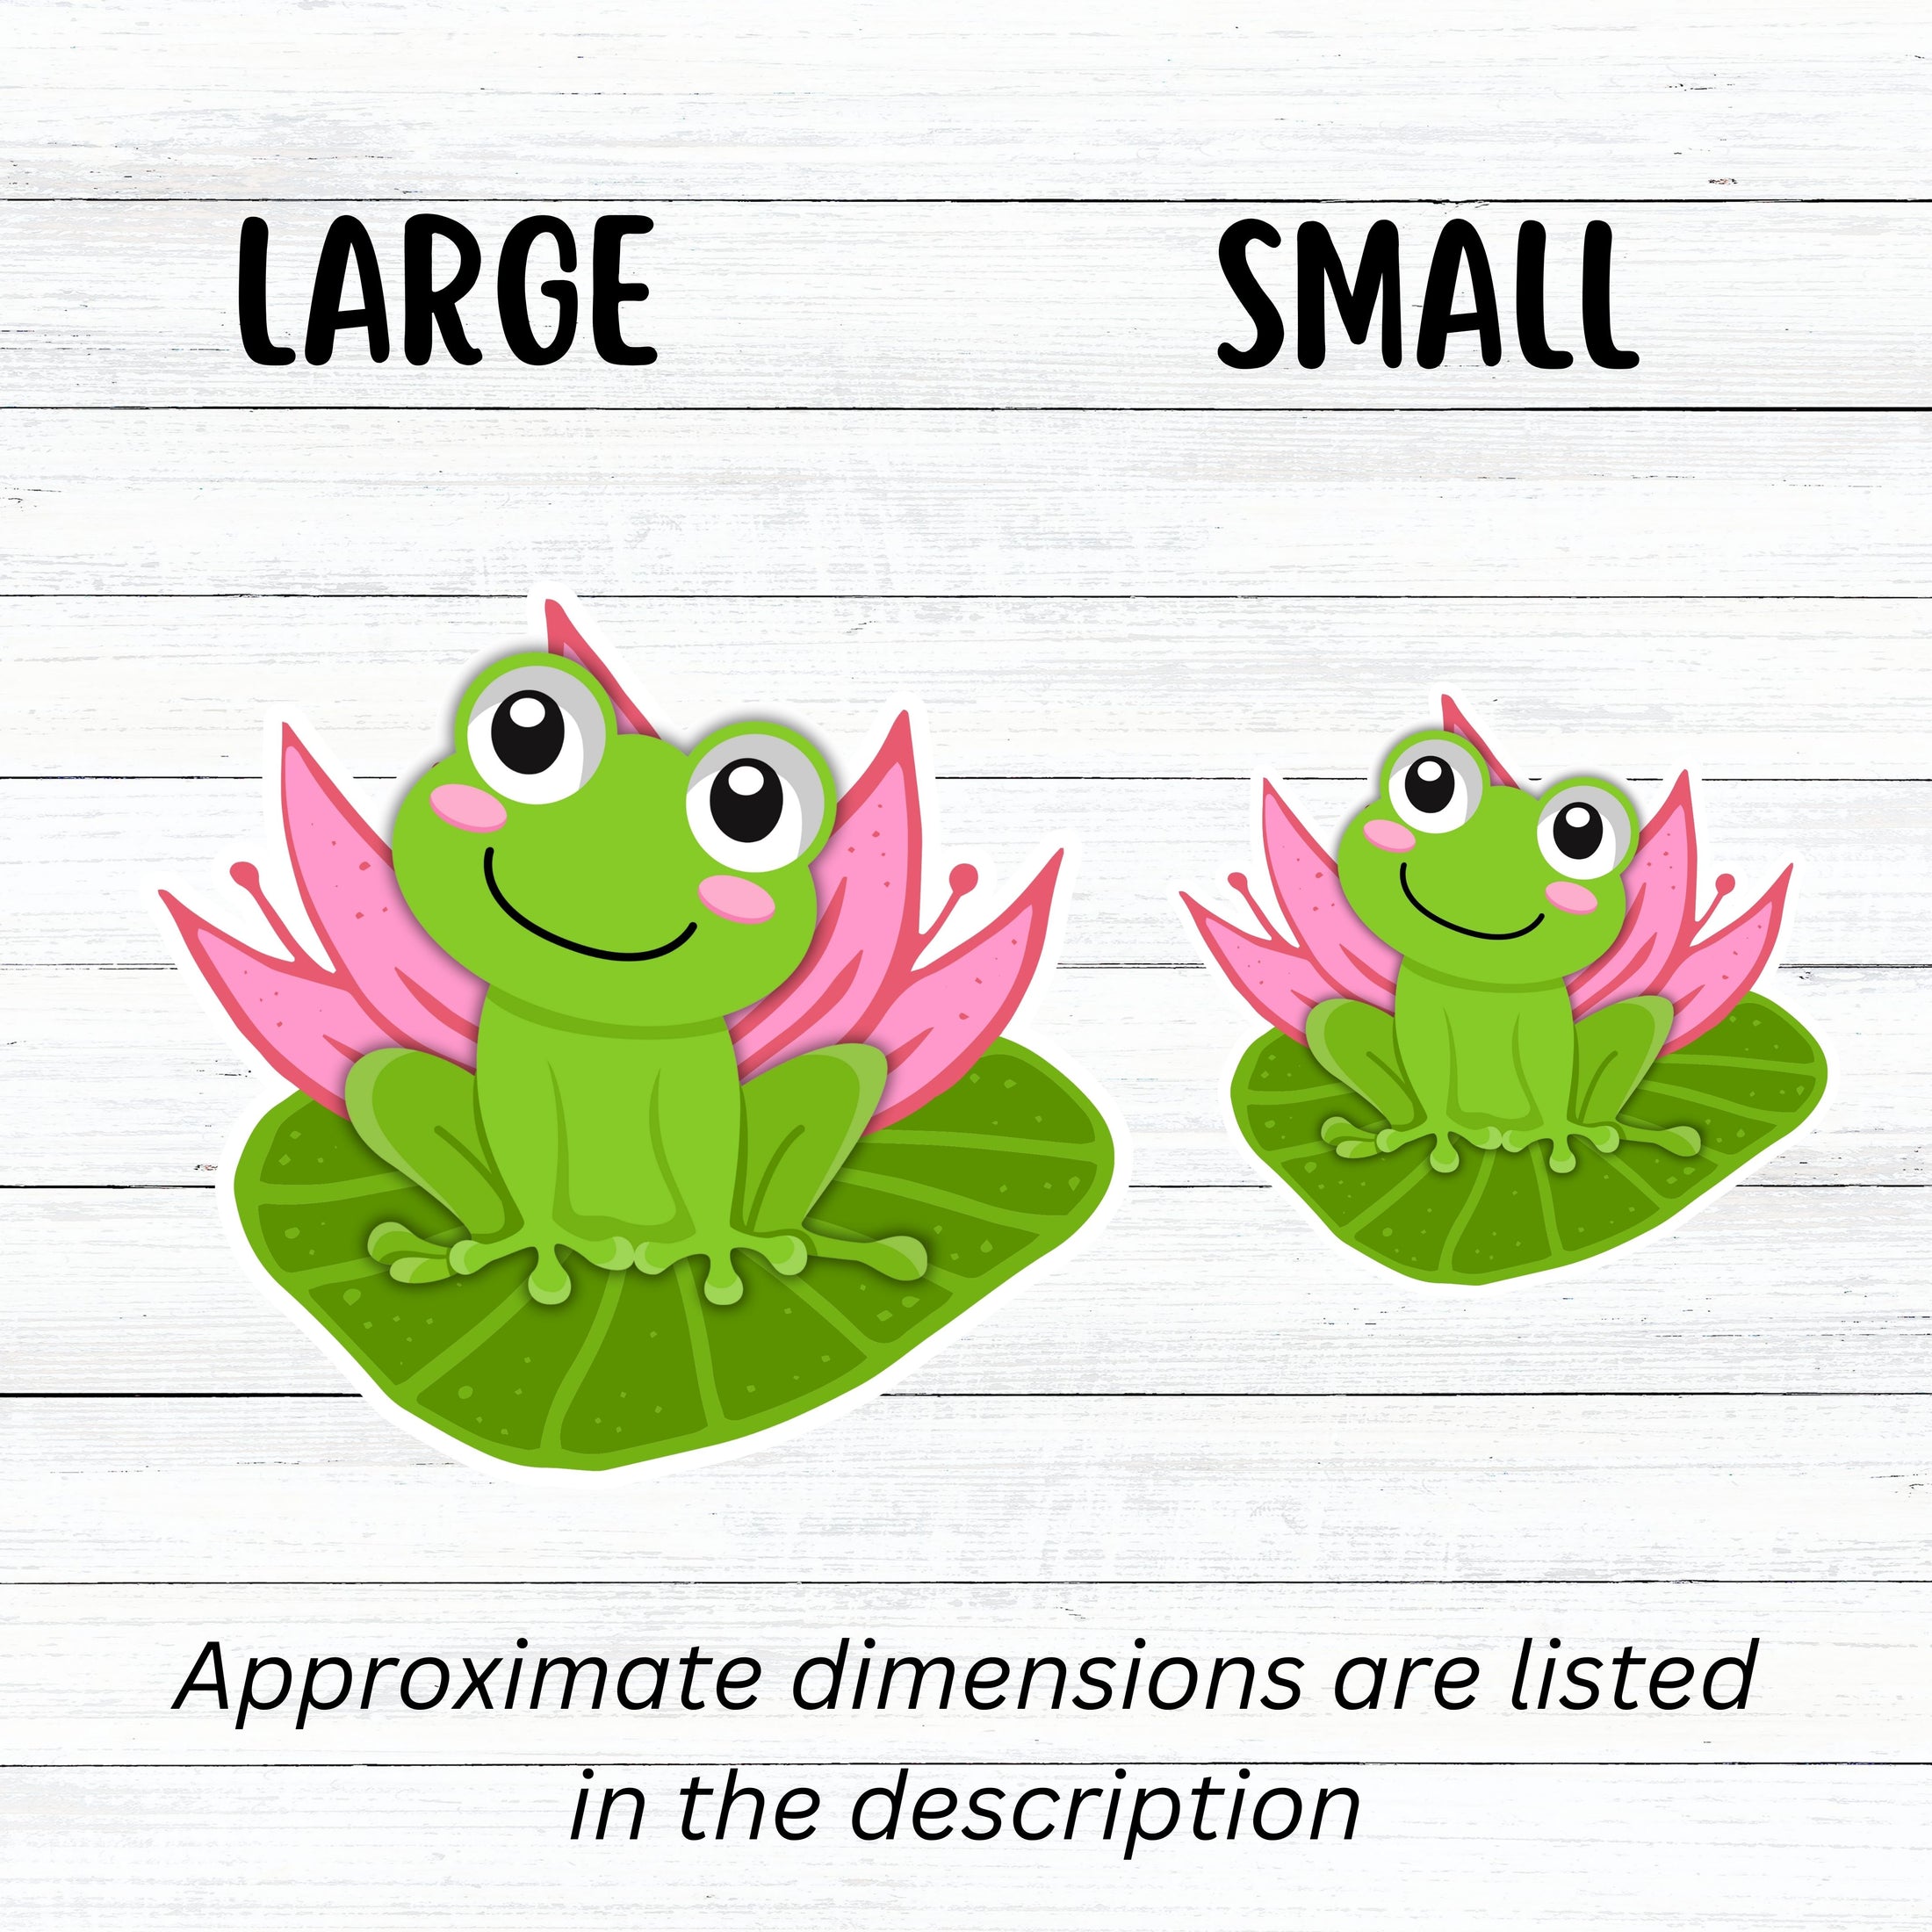 This image shows large and small froggy on a lily pad stickers next to each other.